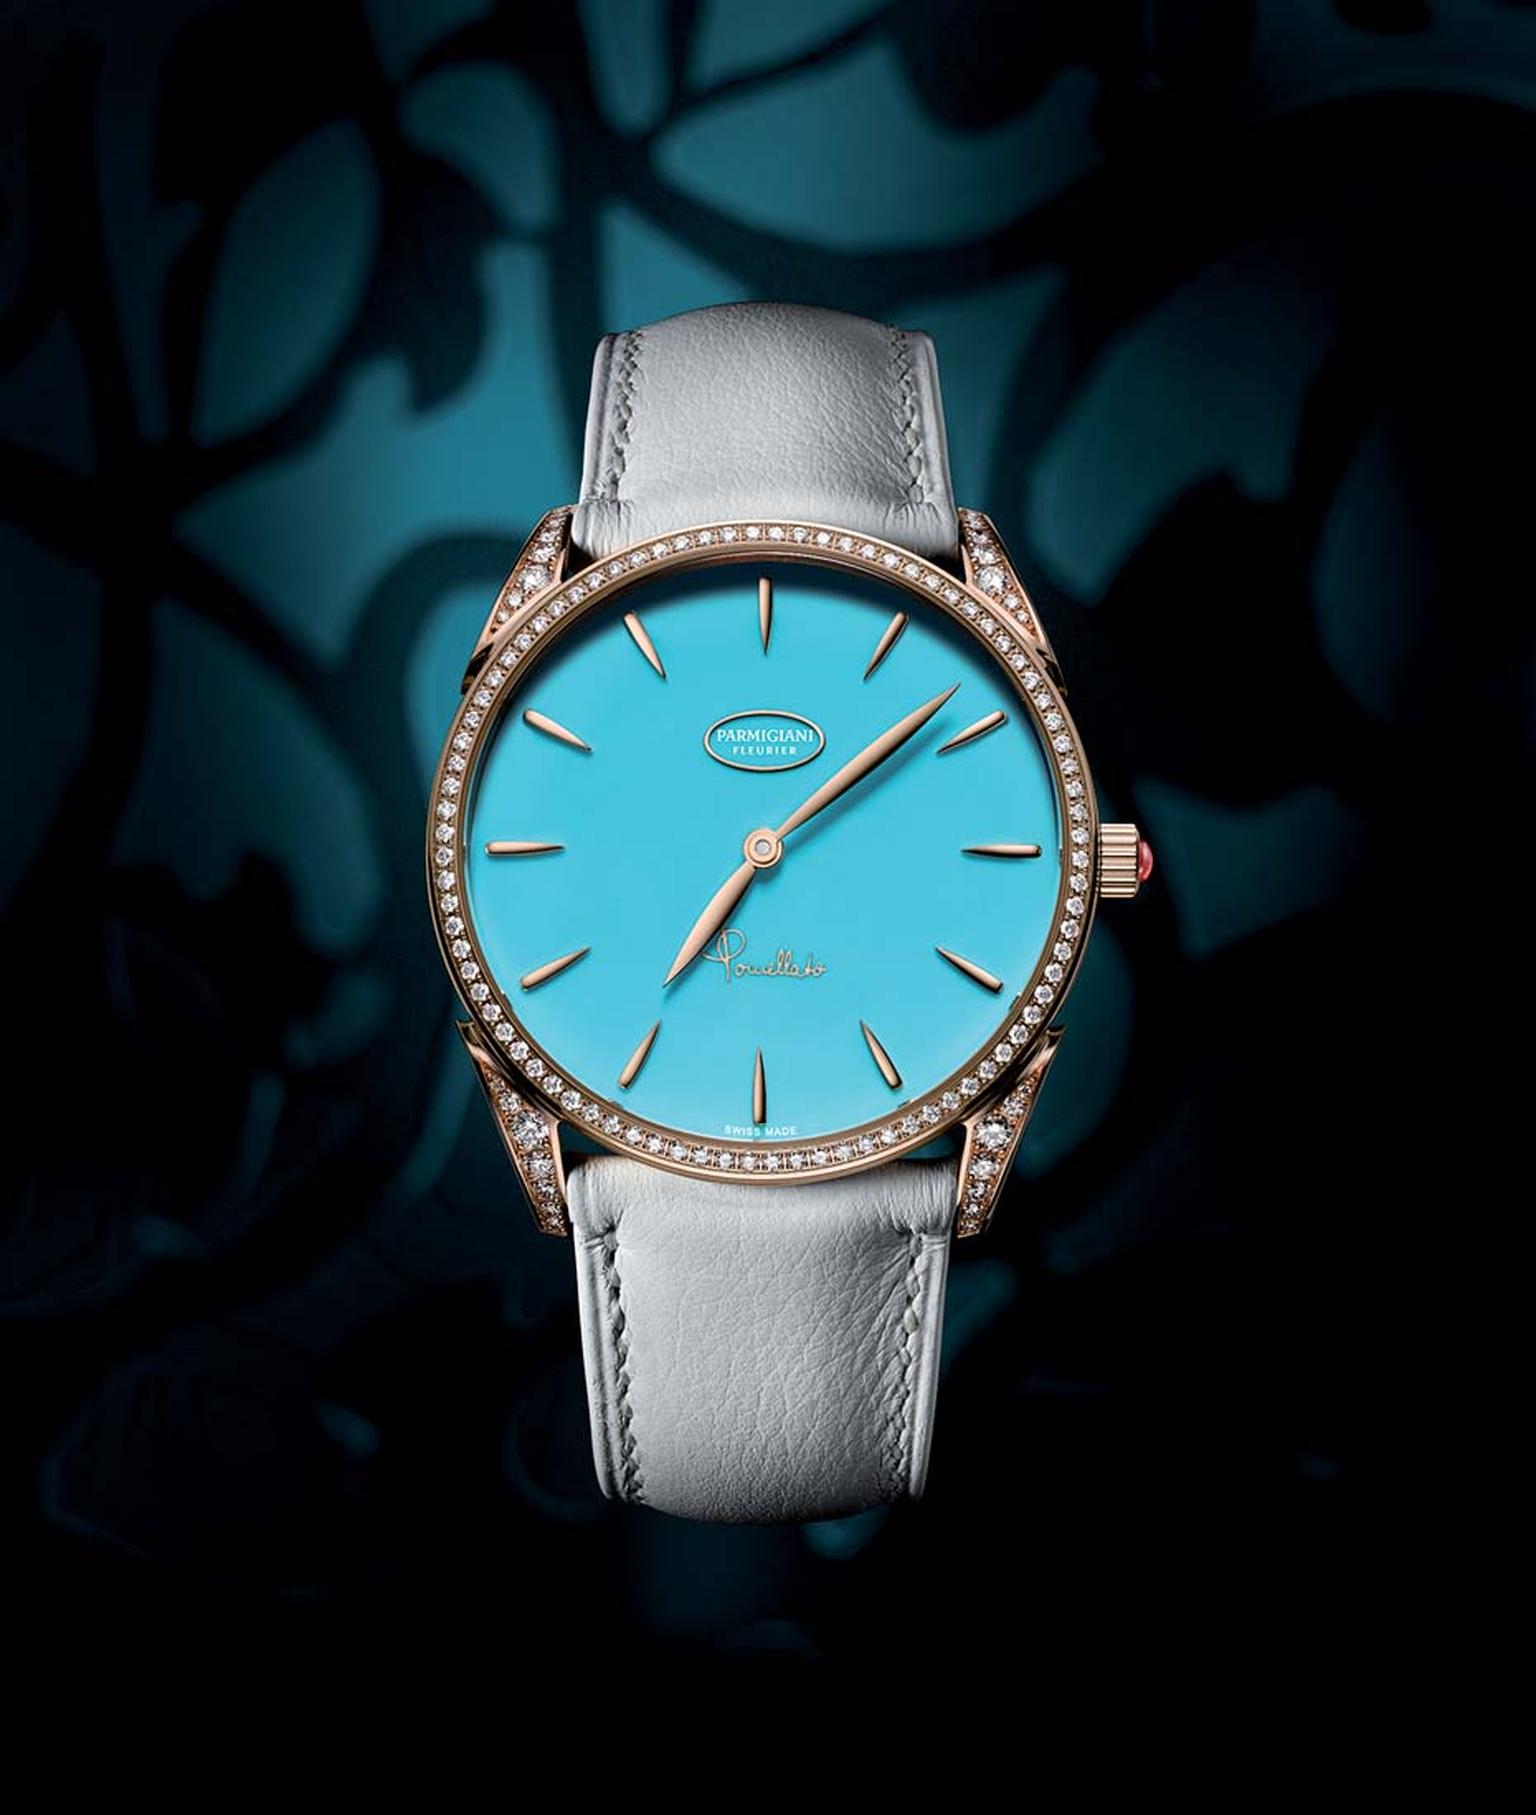 One of the Tonda models captures the spirit of Pomellato's vibrant Capri Collection. The dial features a beautiful turquoise stone set to light with diamonds on the bezel and lugs.